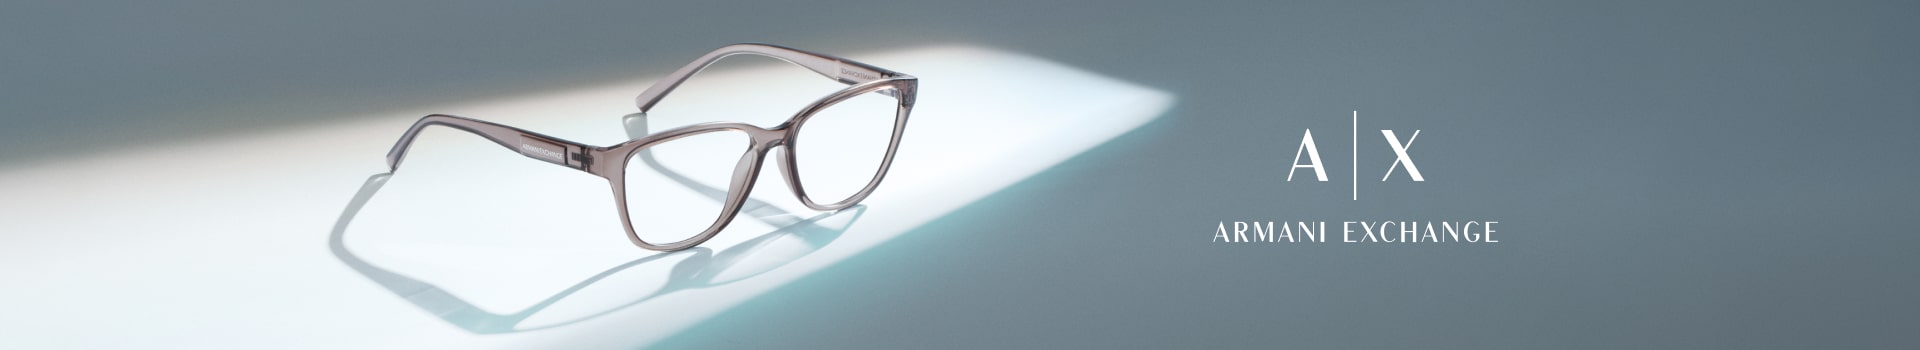 Armani Exchange Glasses: Modern trends meet elevated style.